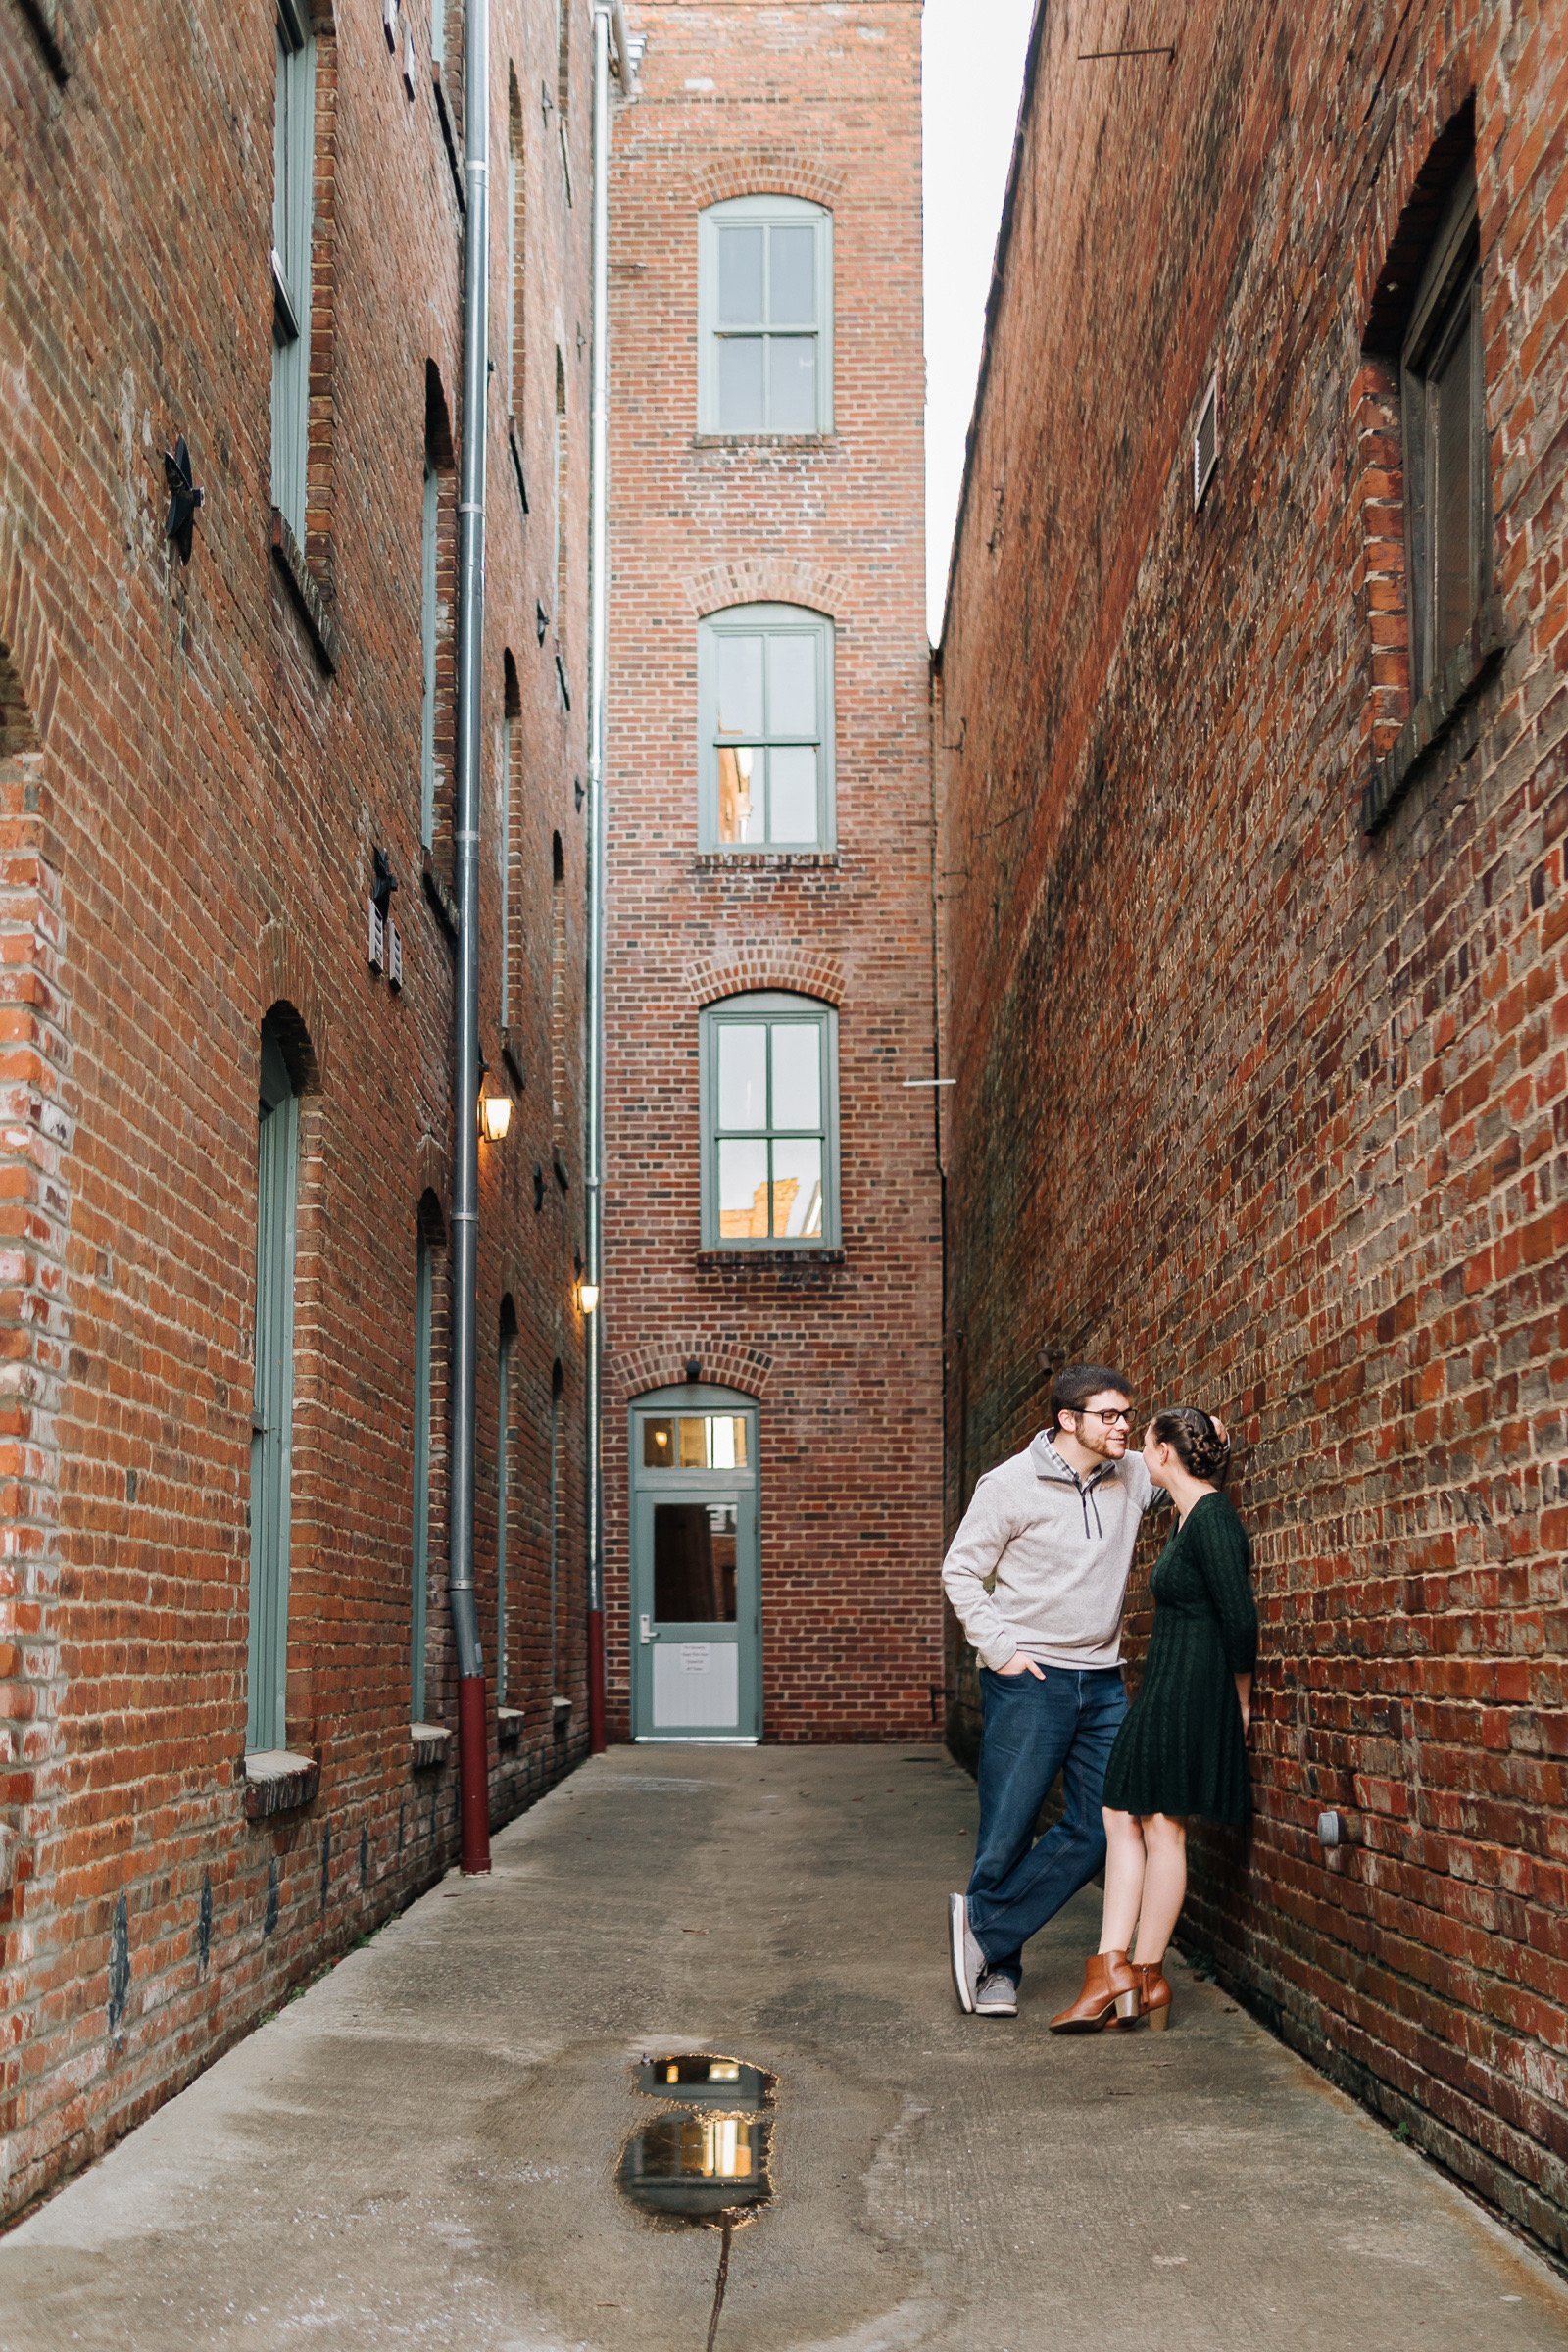 jameson-anna-engagement-session-downtown-danville-river-district-virginia-by-jonathan-hannah-photography-17.jpg